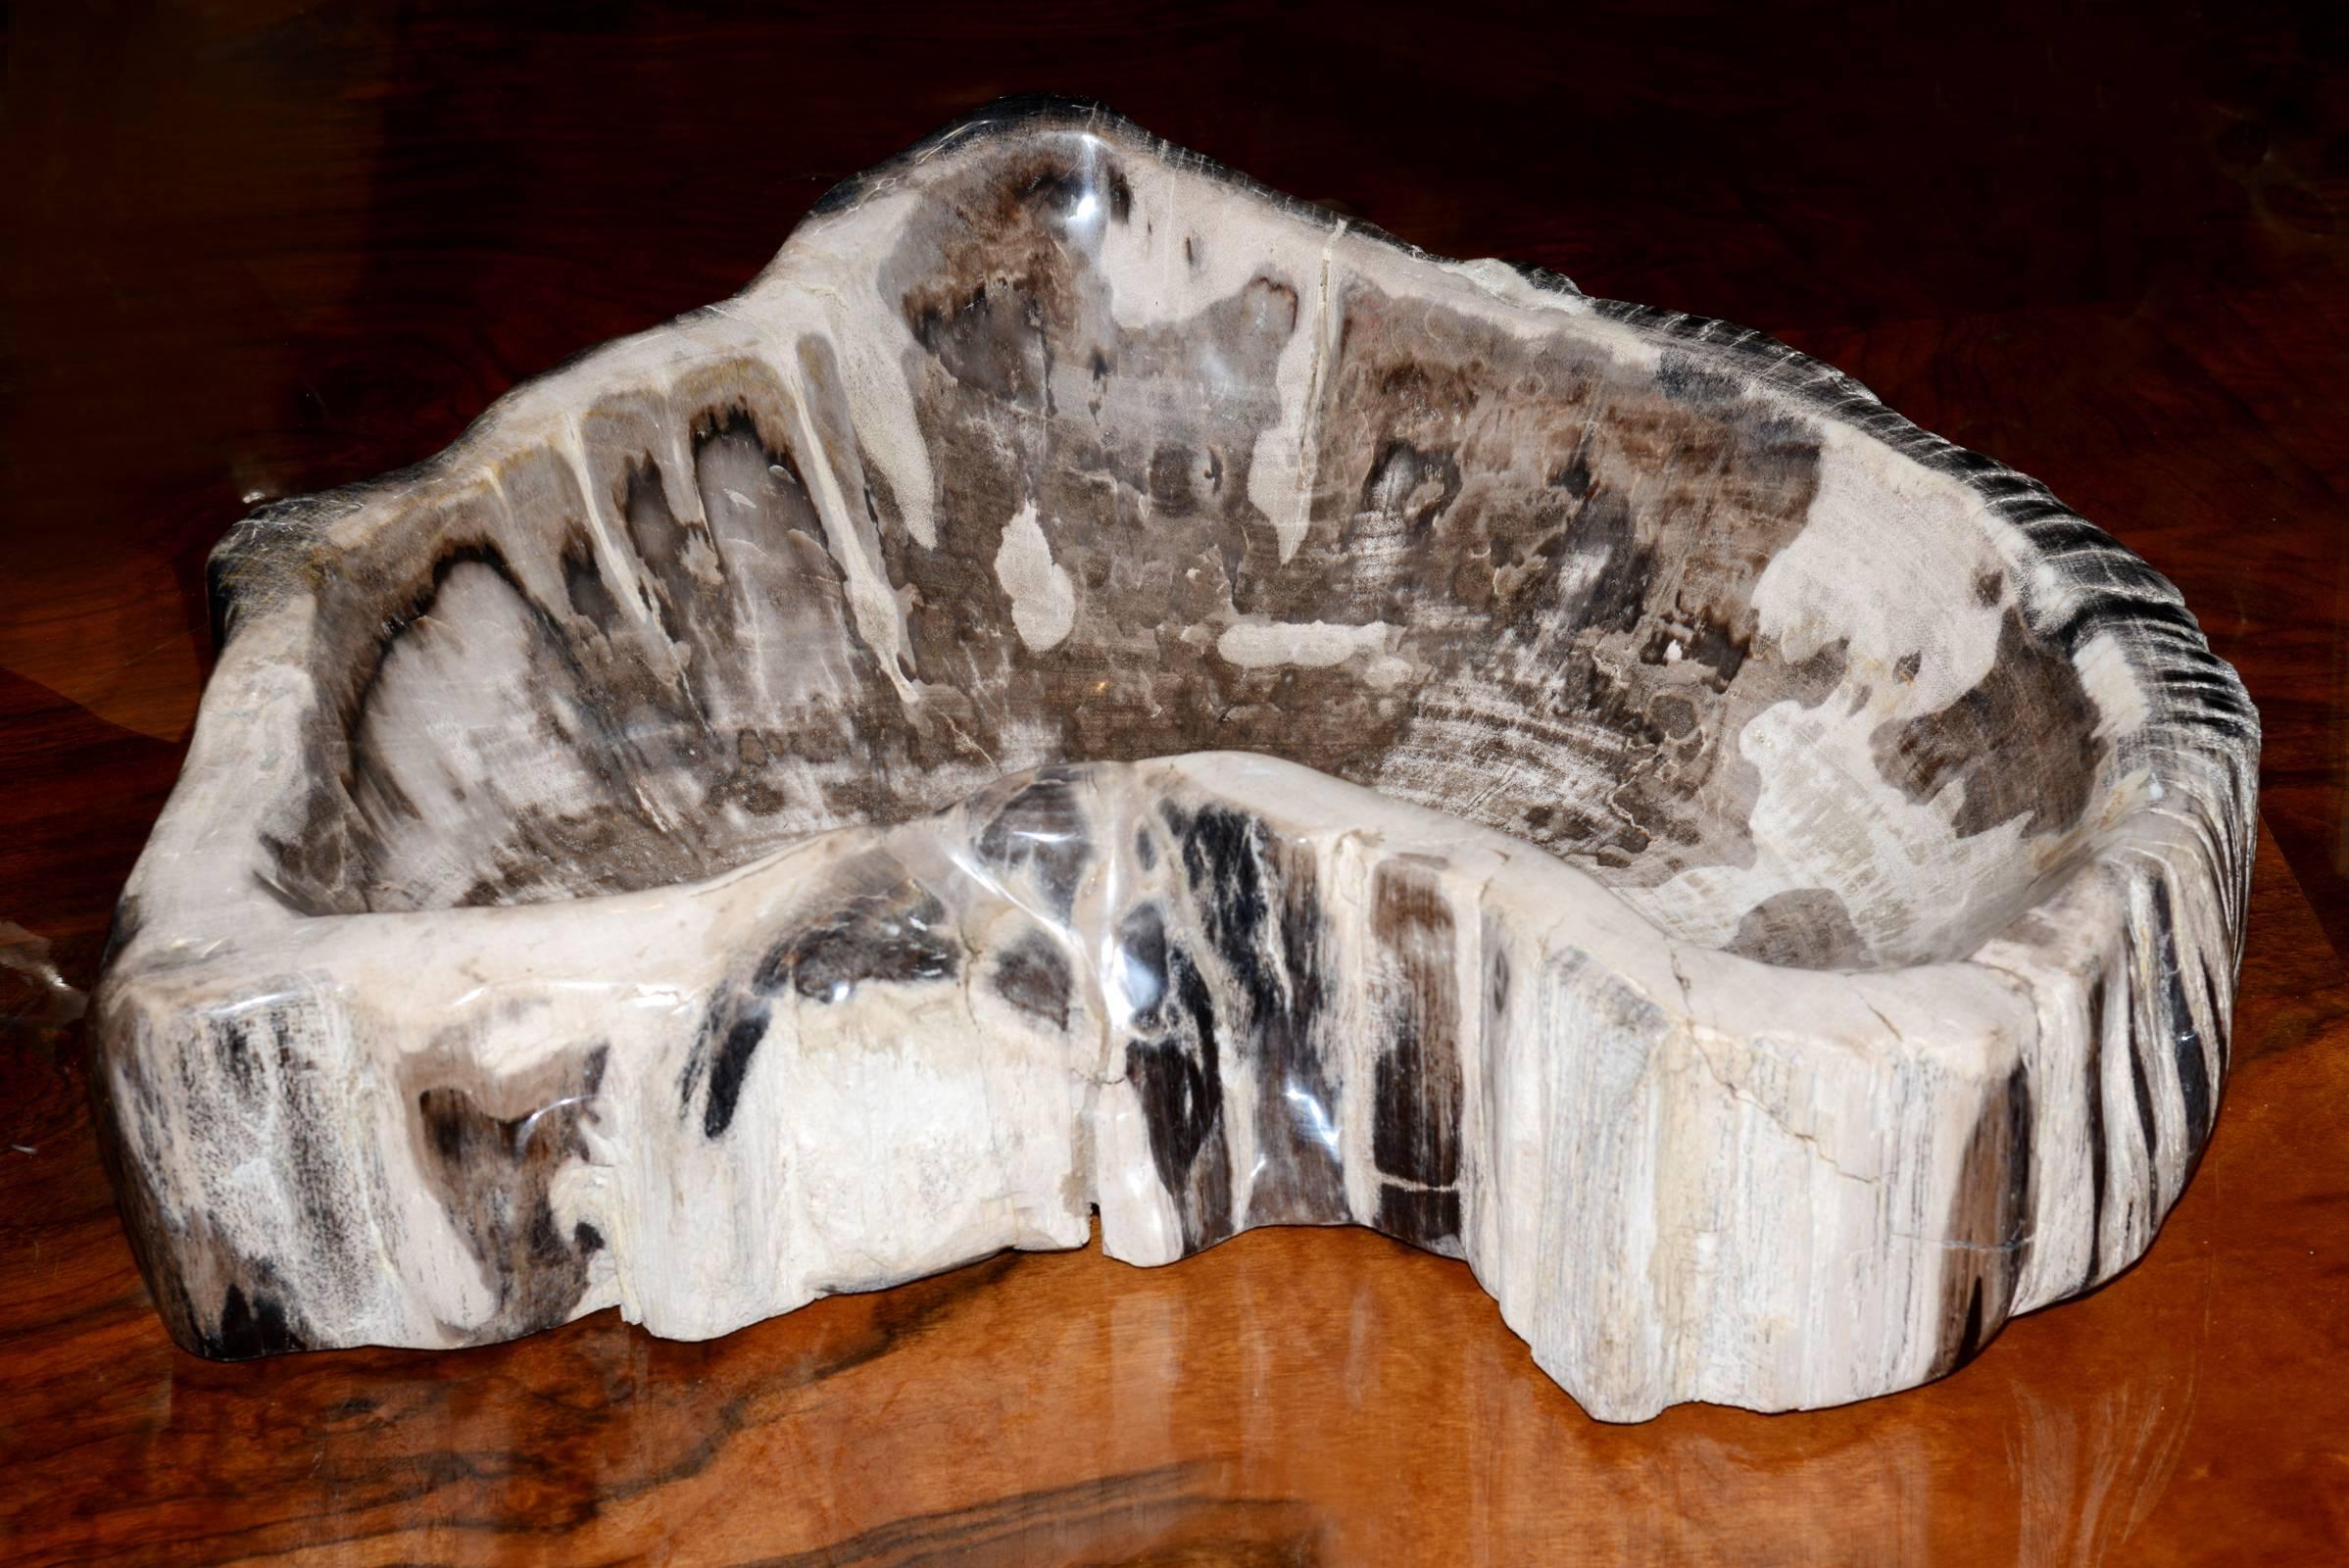 Ashtray Large in petrified wood from Indonesia.
Authentic 15th century petrified wood.
Measure: Weight 24kg.
